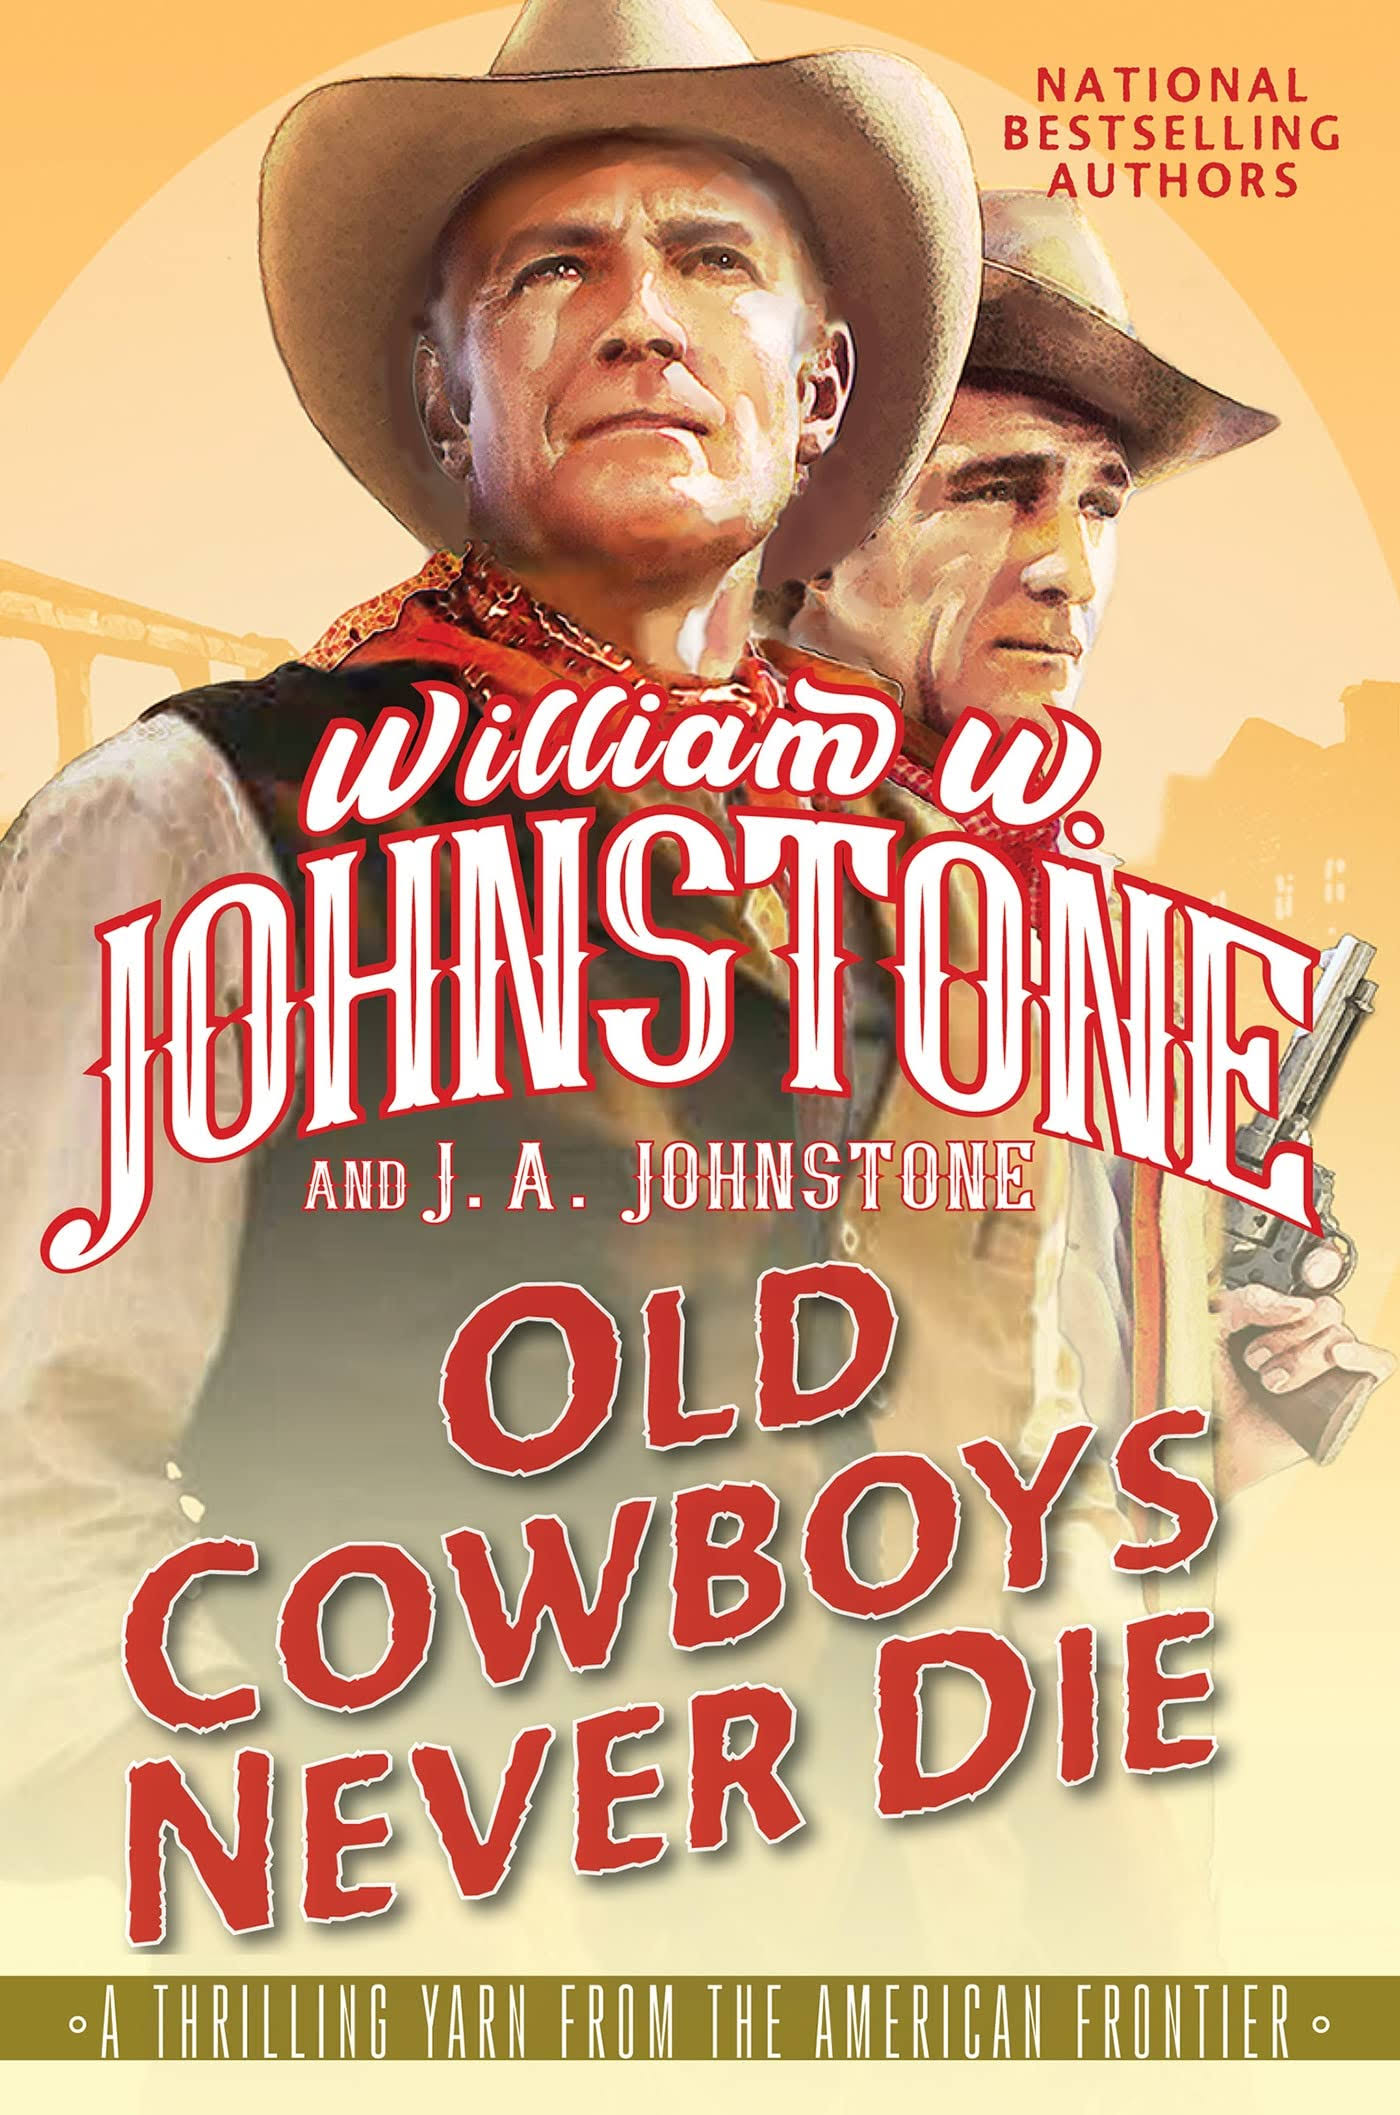 Old Cowboys Never Die by William W. Johnstone